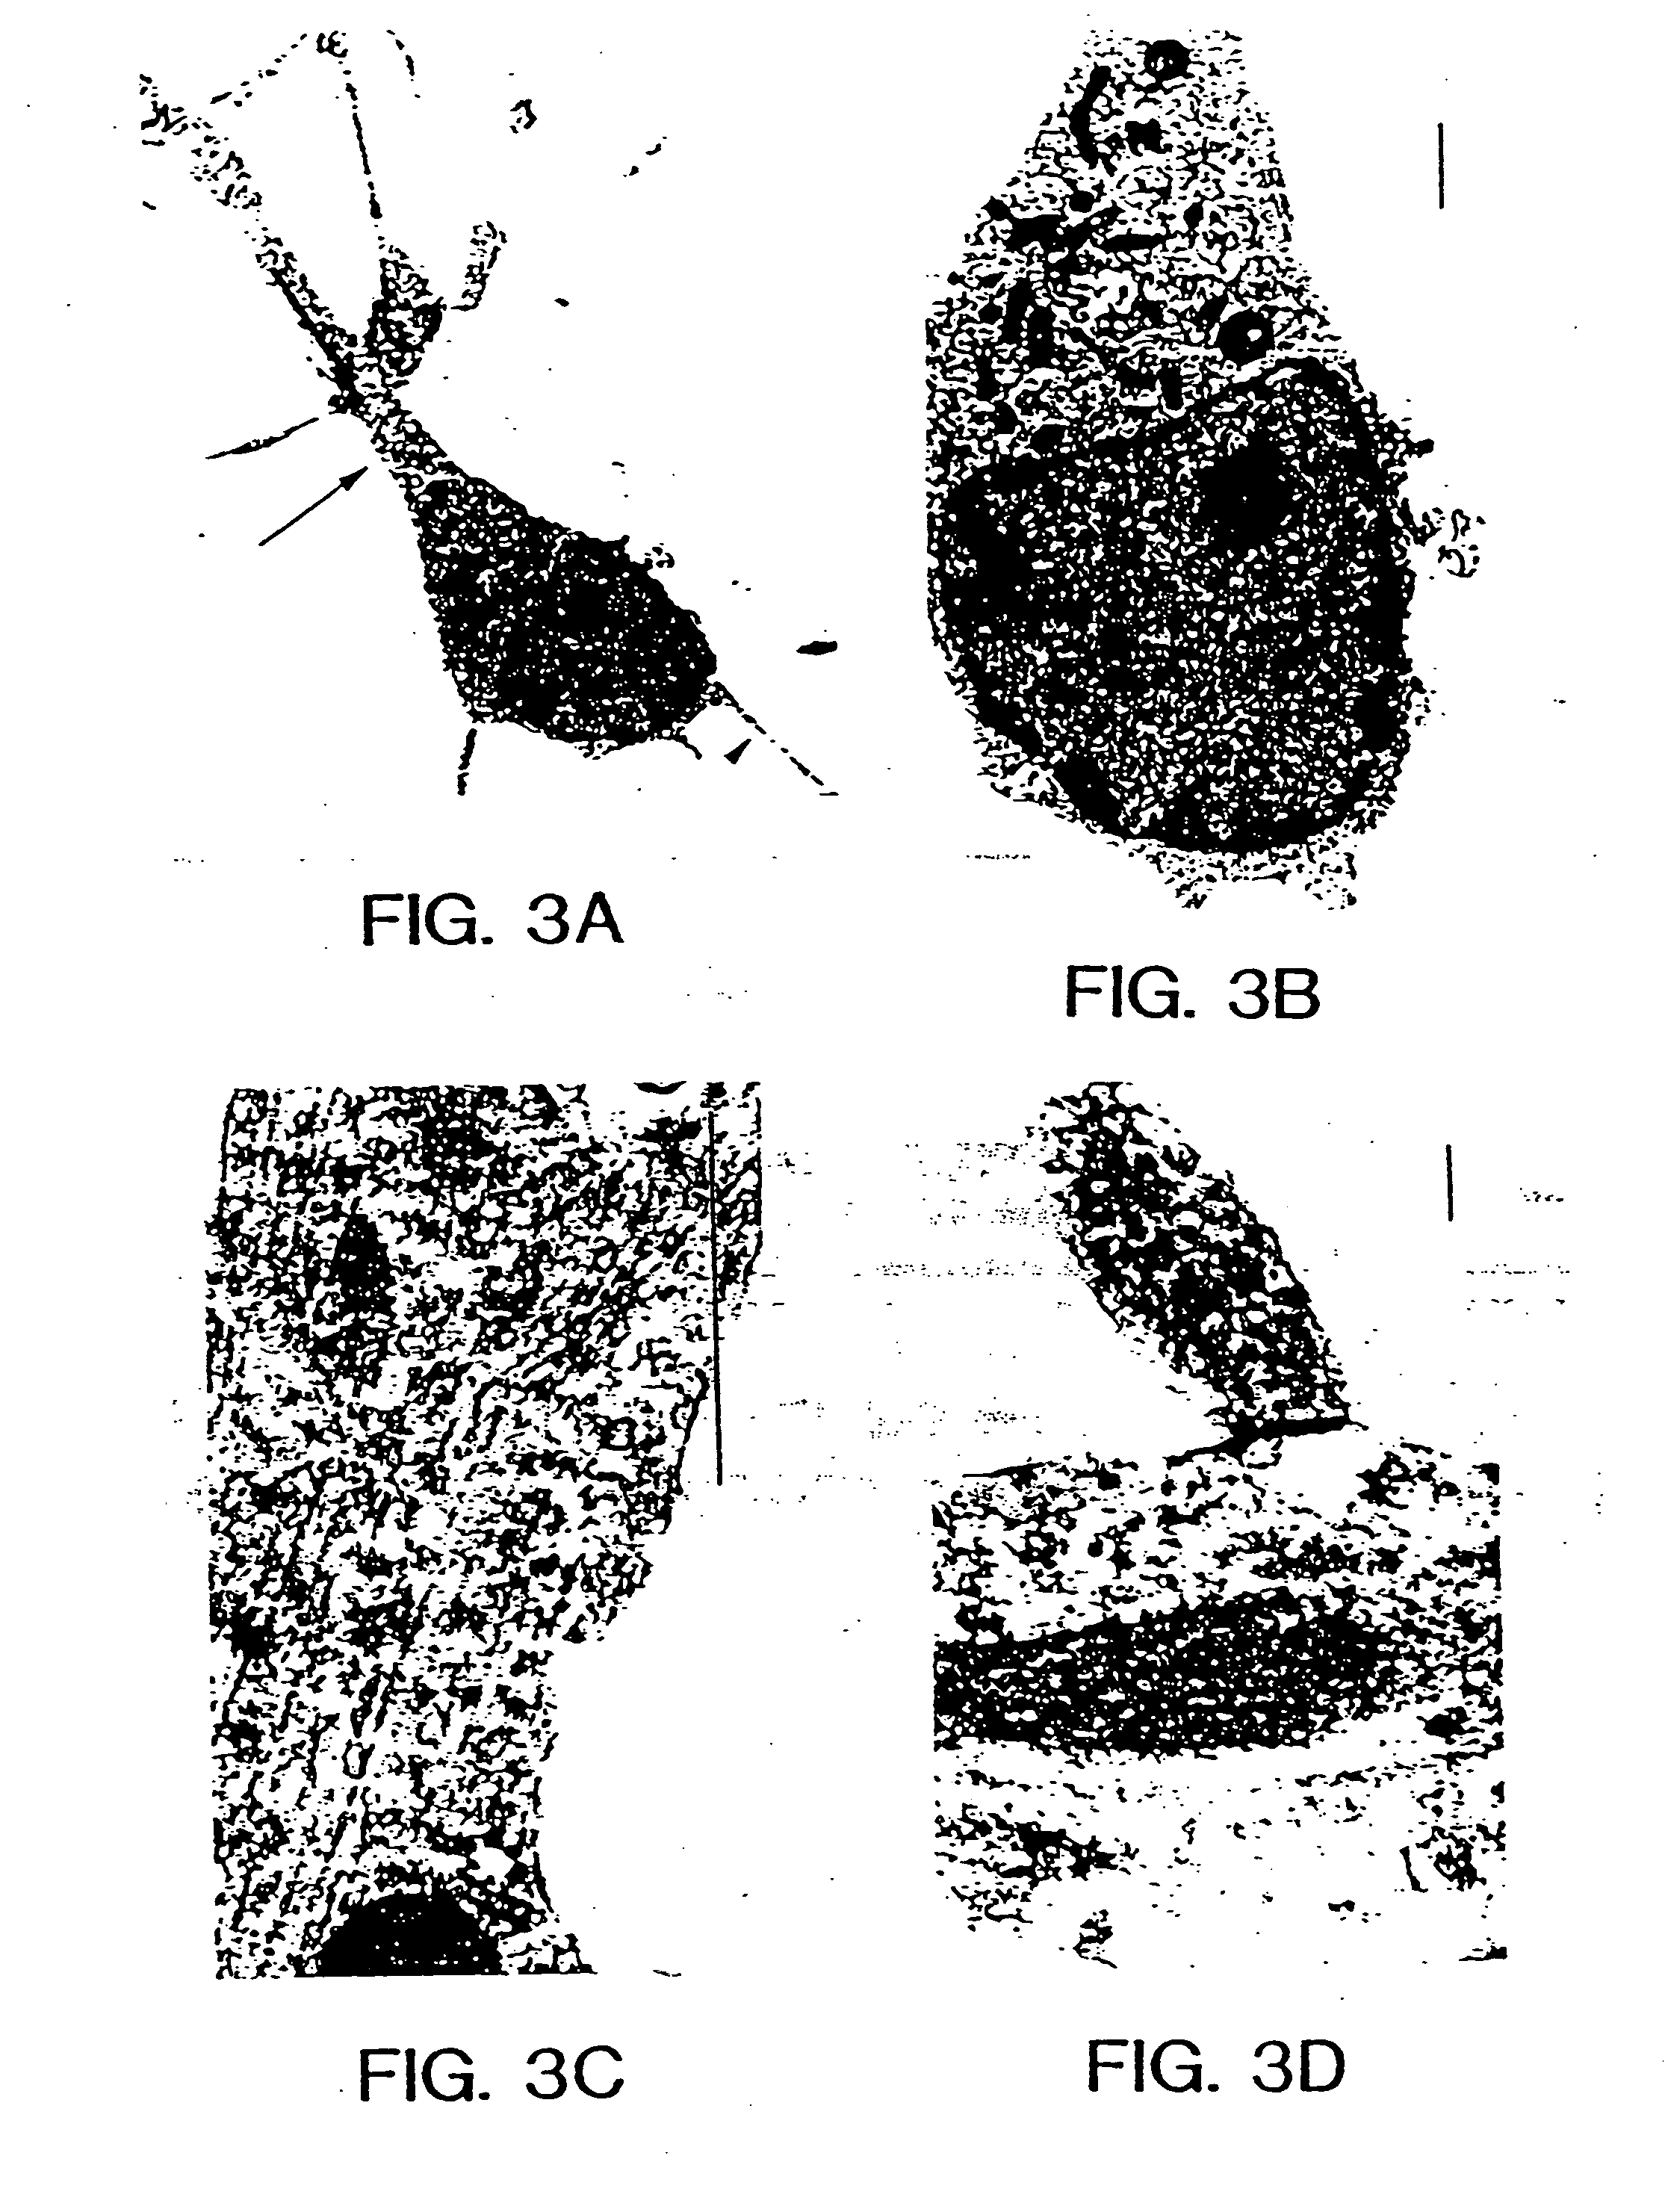 Method for production of neuroblasts